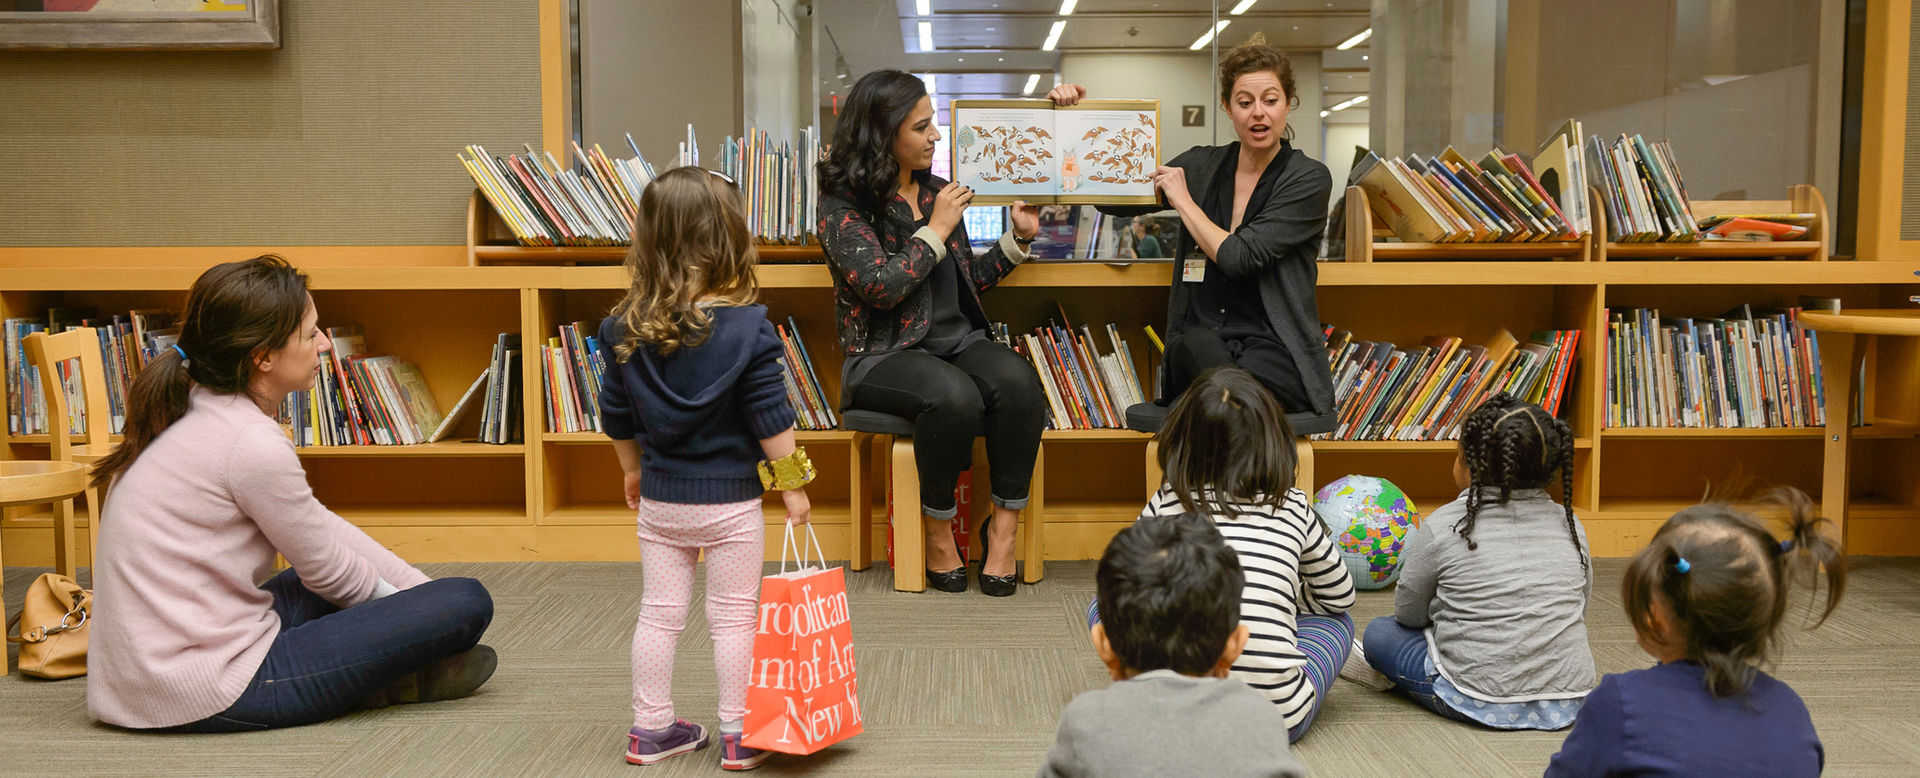 Two women display a picture book as they read to five children in a modern, well-lit, spacious, and open library with low bookshelves filled with books